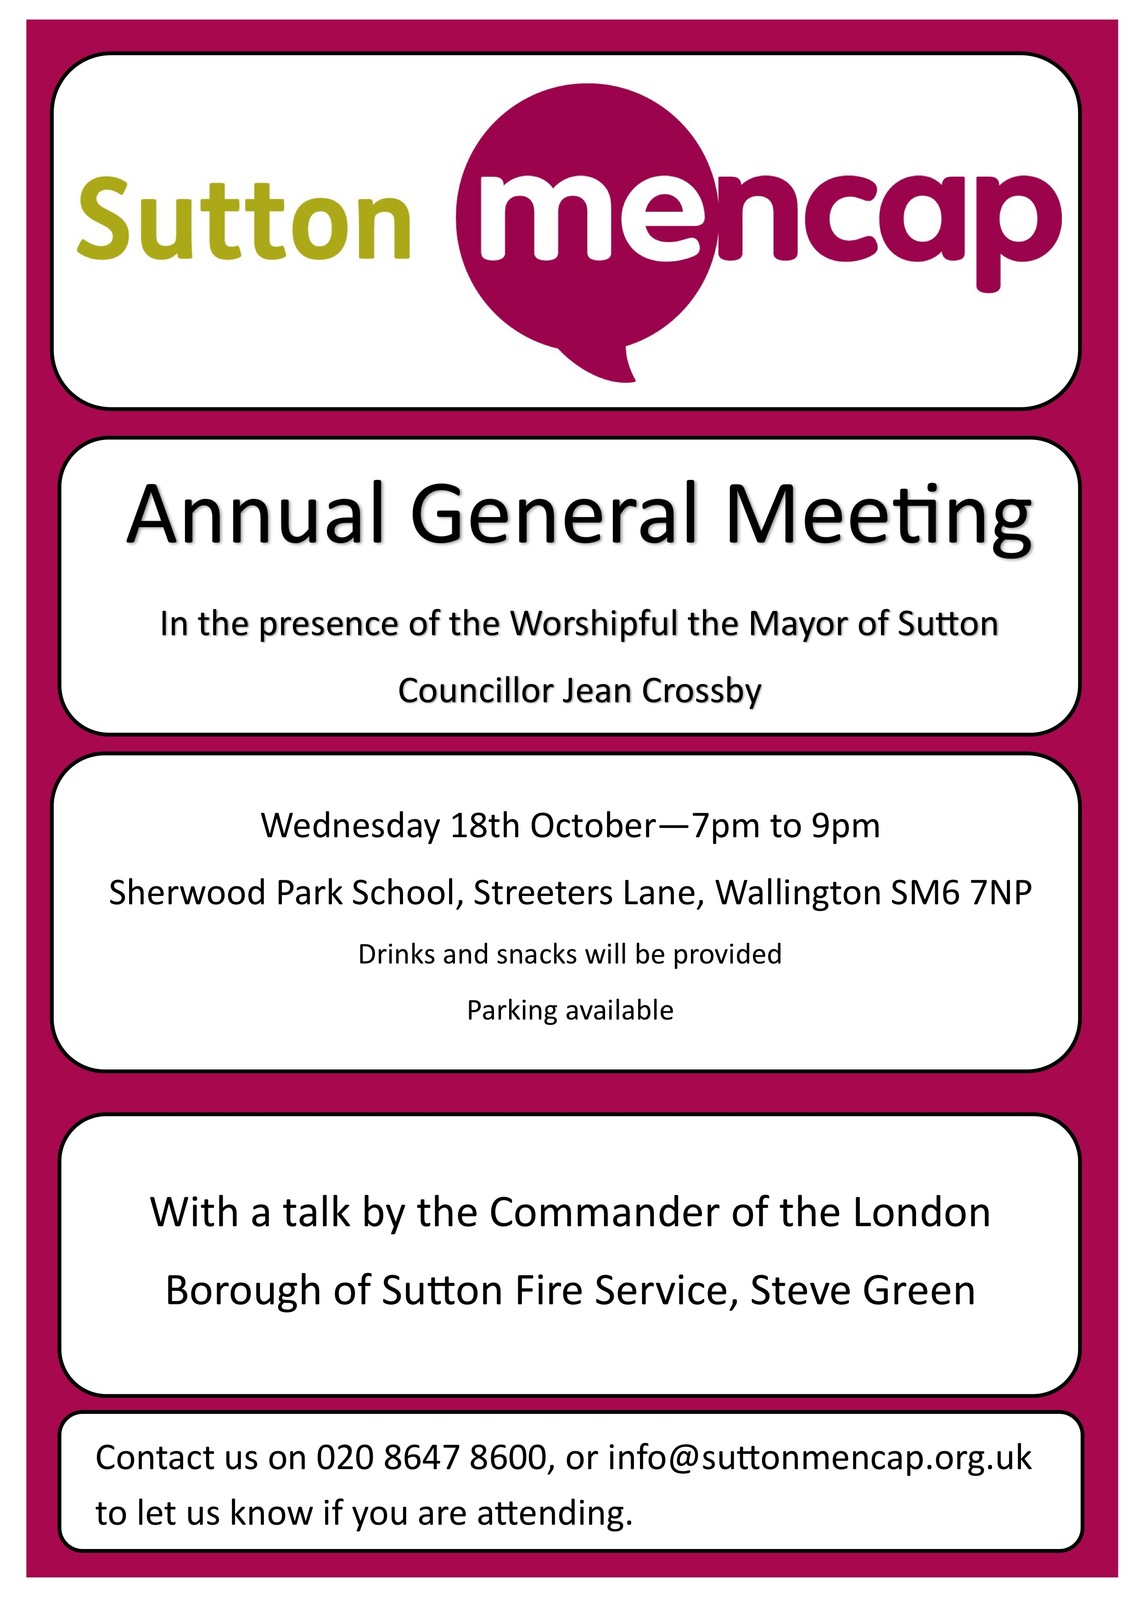 
Invitation to Sutton Mencap’s Annual General Meeting Poster